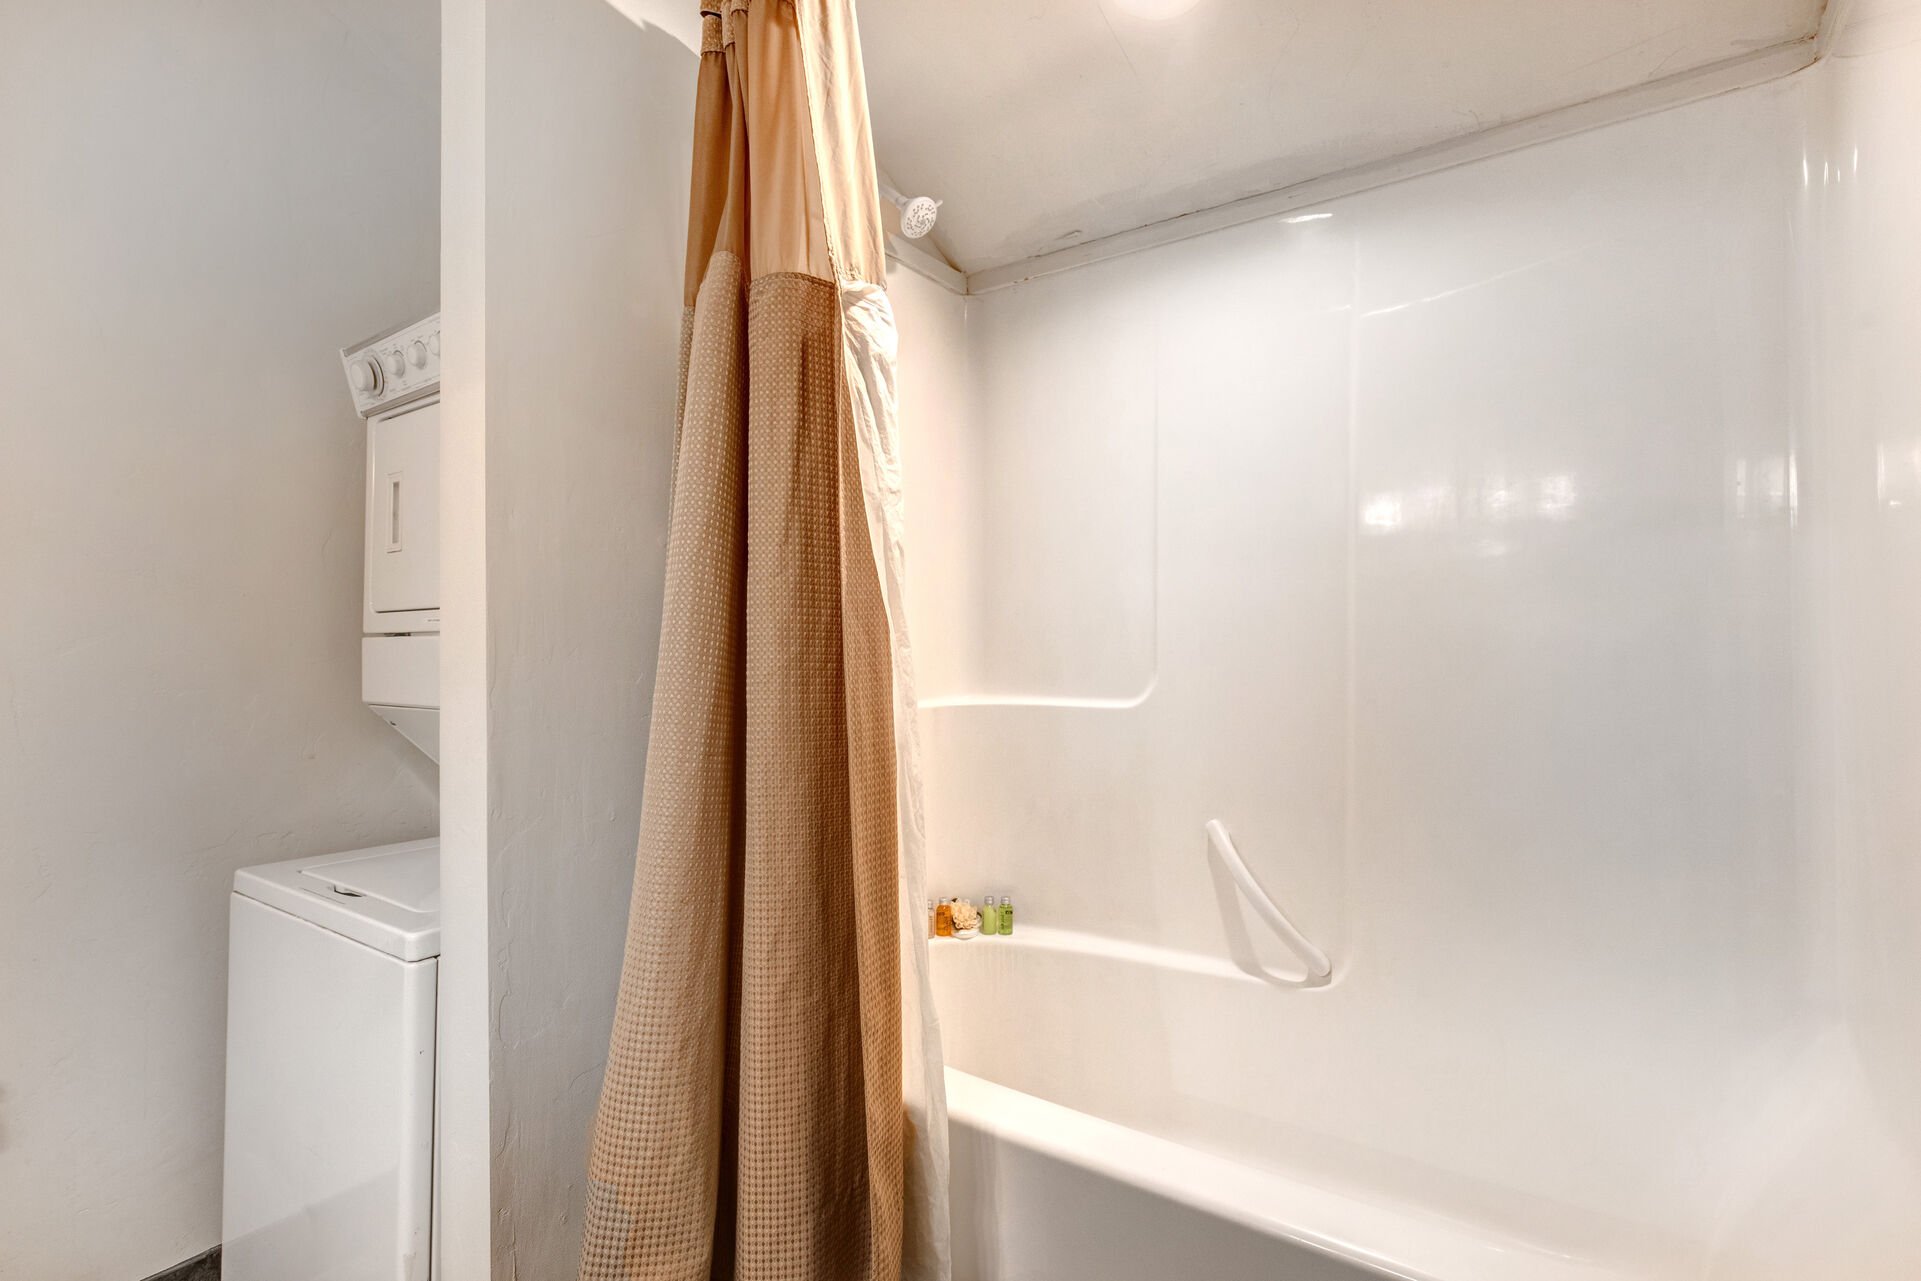 Main Level Shared Bath with double sinks, tub/shower combo, and private laundry units